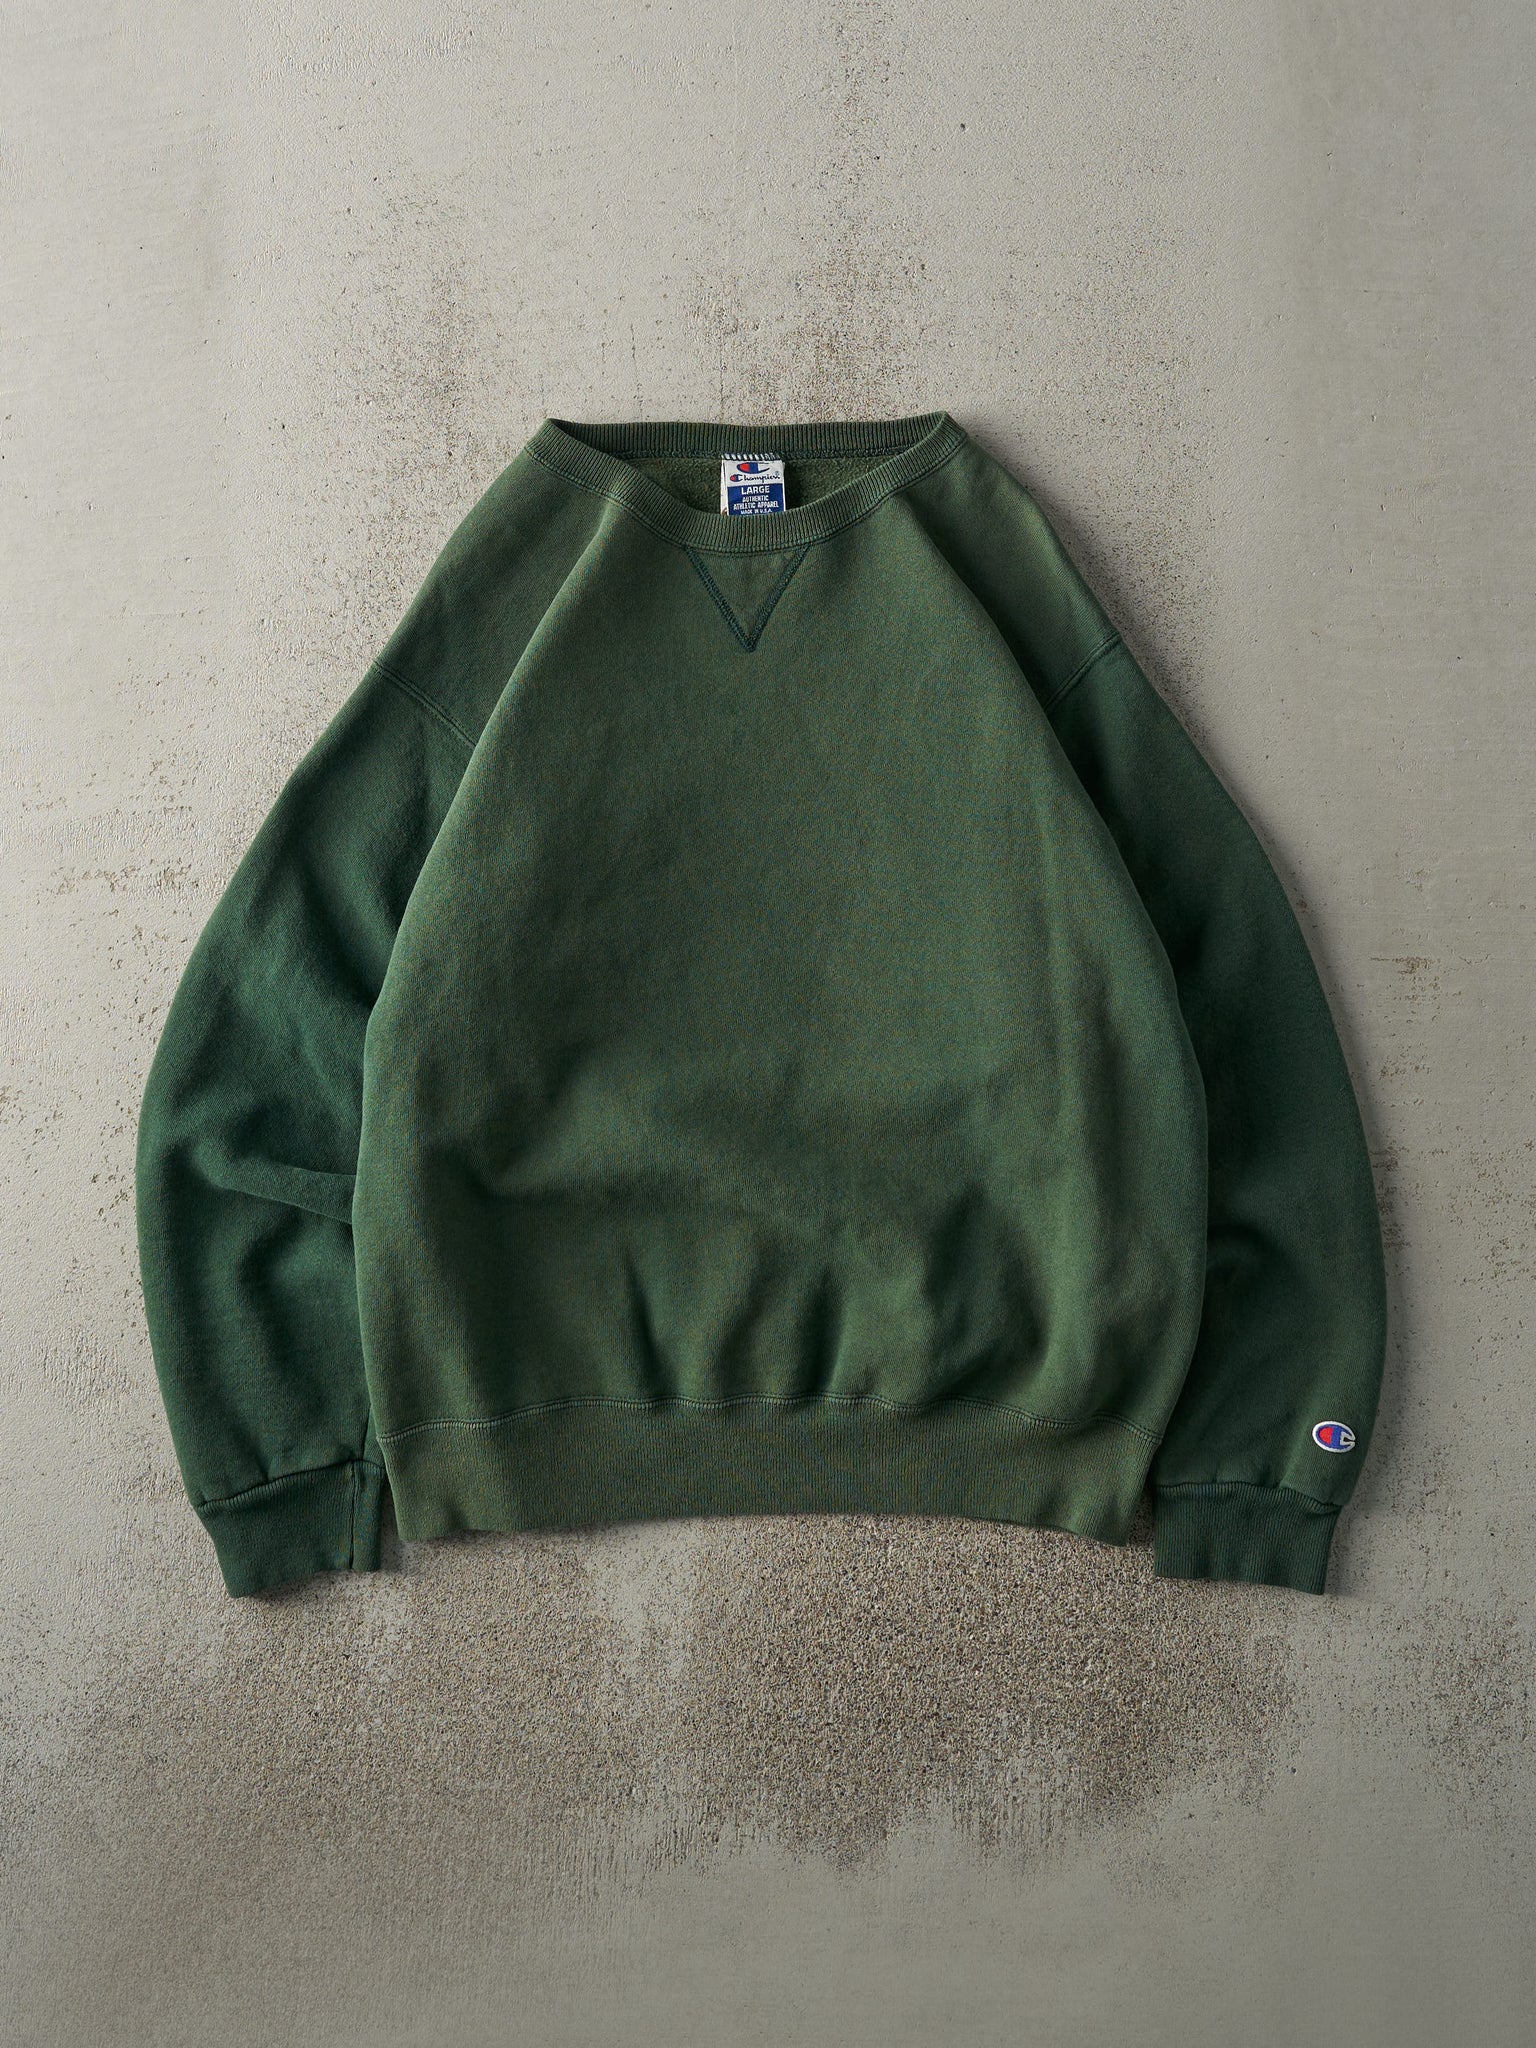 Vintage 90s Sun Faded Forest Green Blank Champion Crewneck (M)